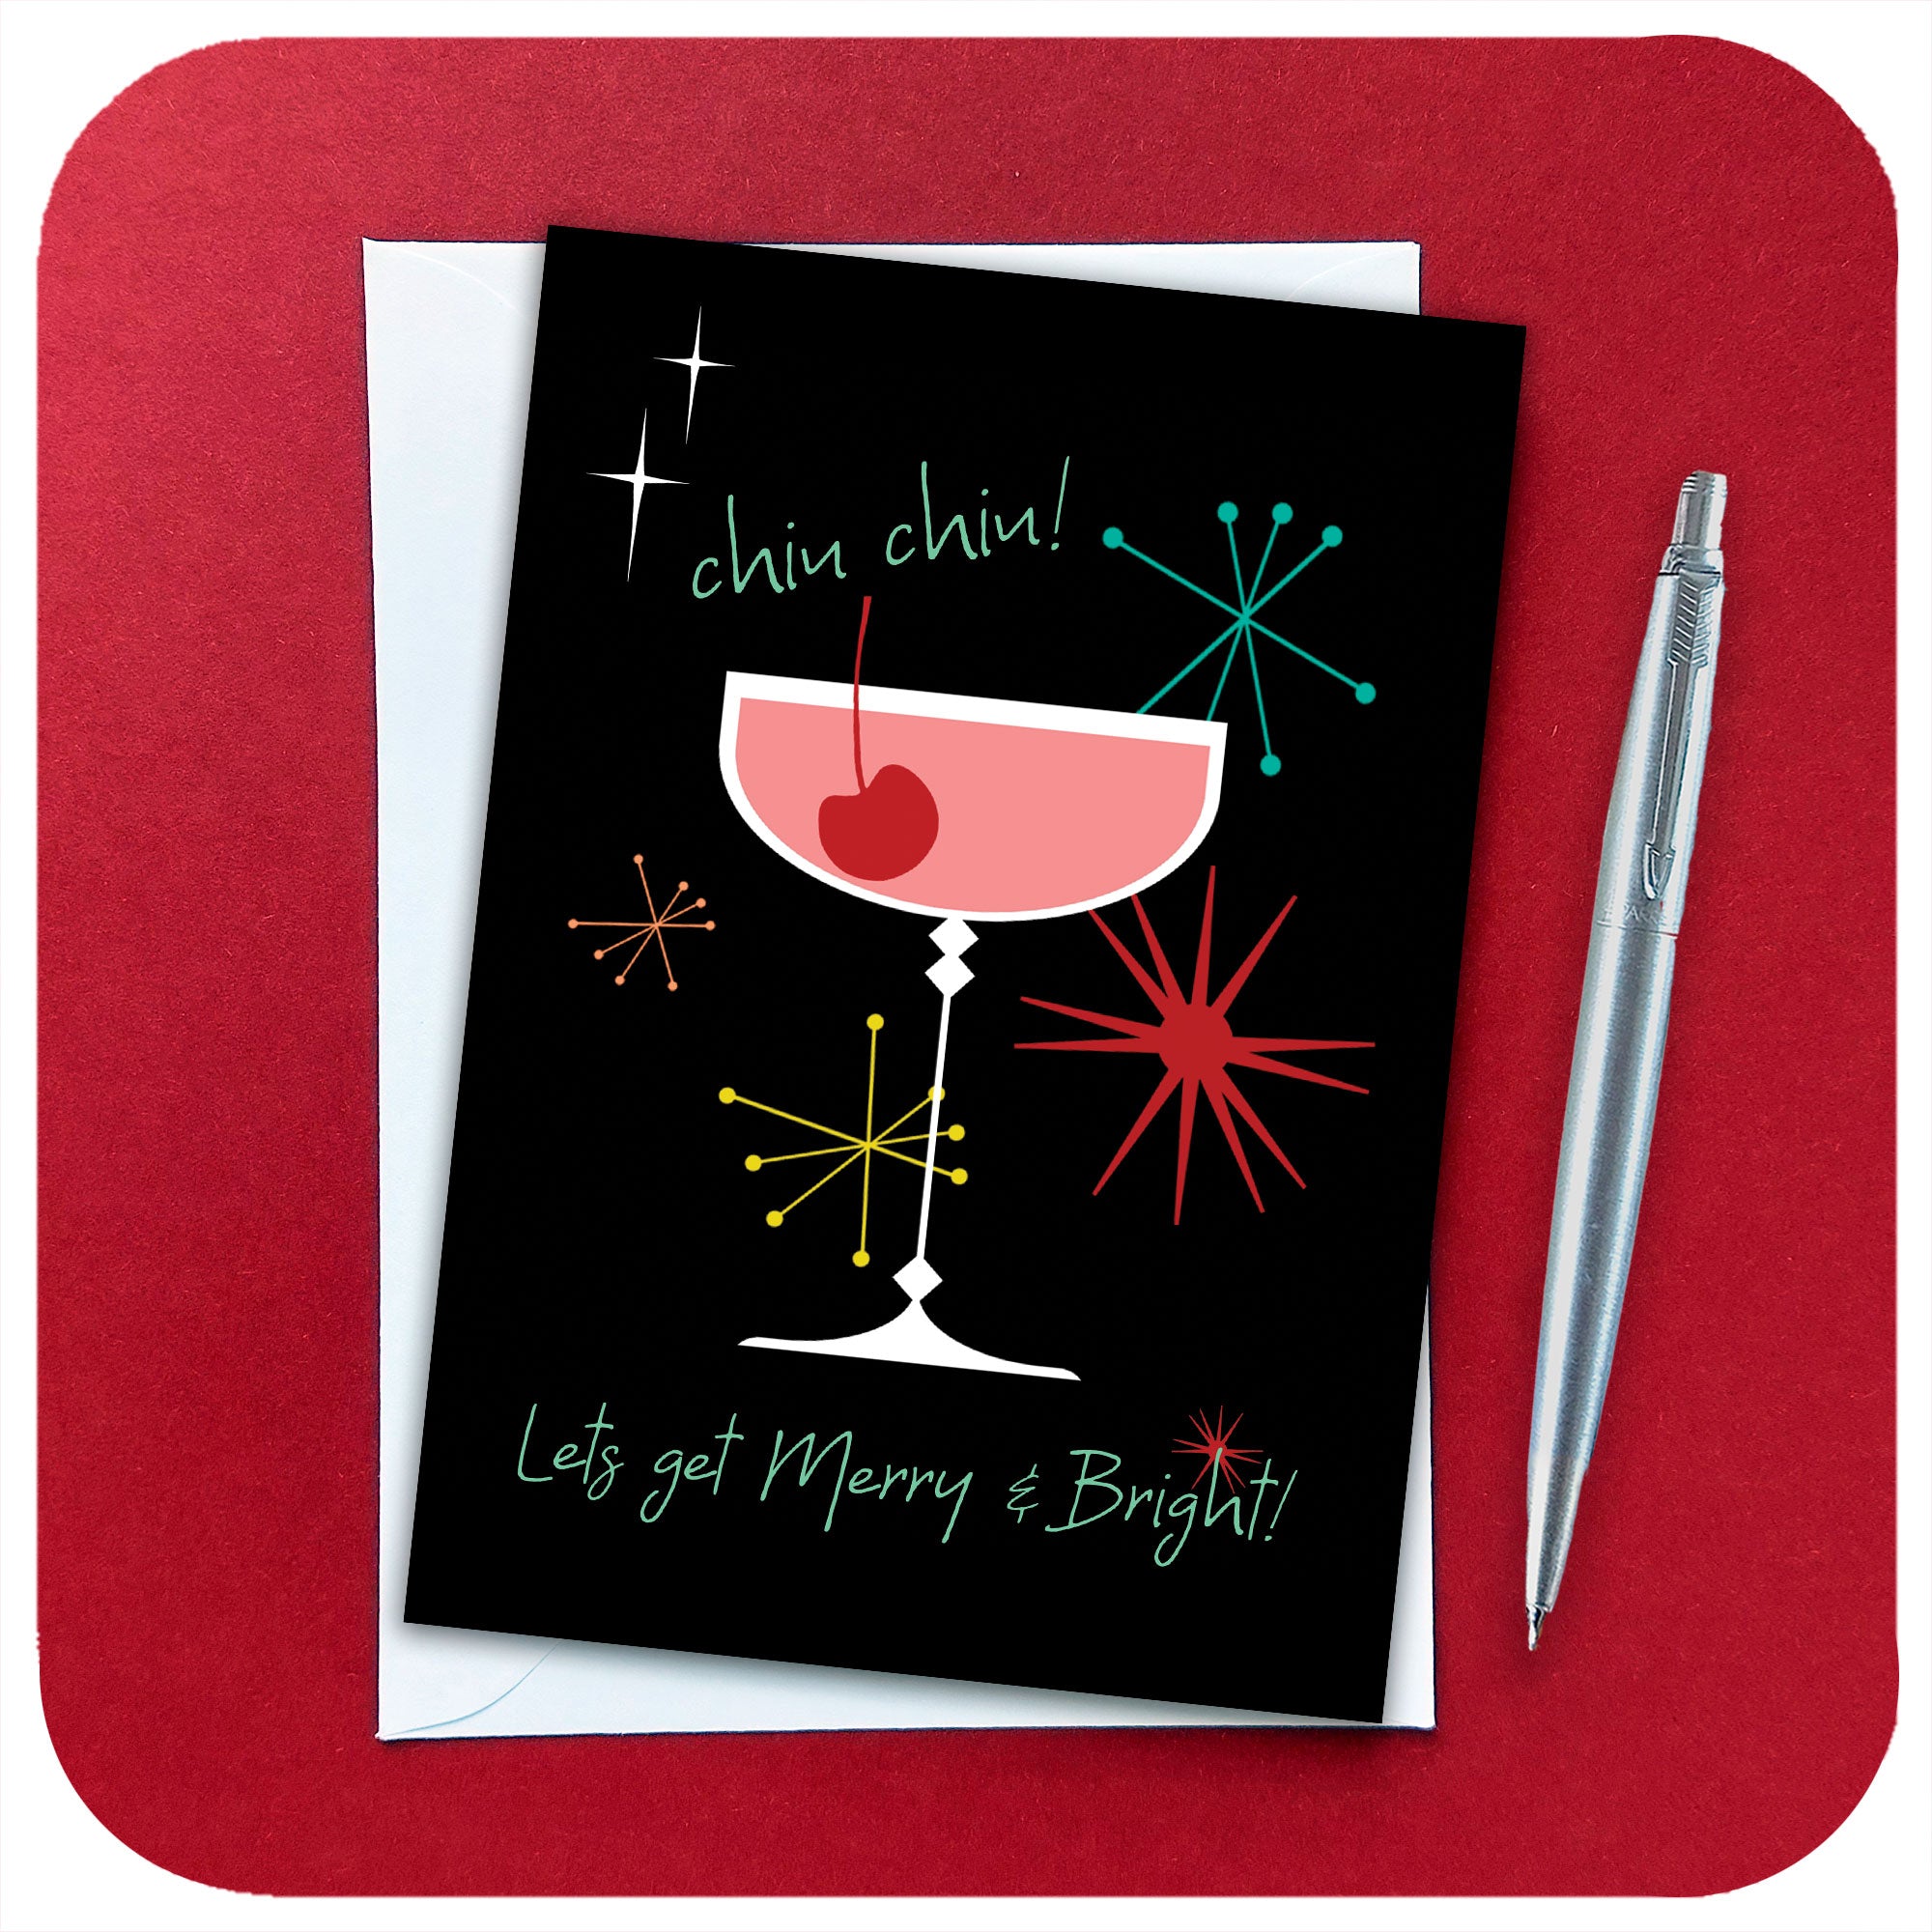 Chin chin! Let's Get Merry & Bright!Mid century style Christmas card with white envelope and silver pen on a red background | The Inkabilly Emporium